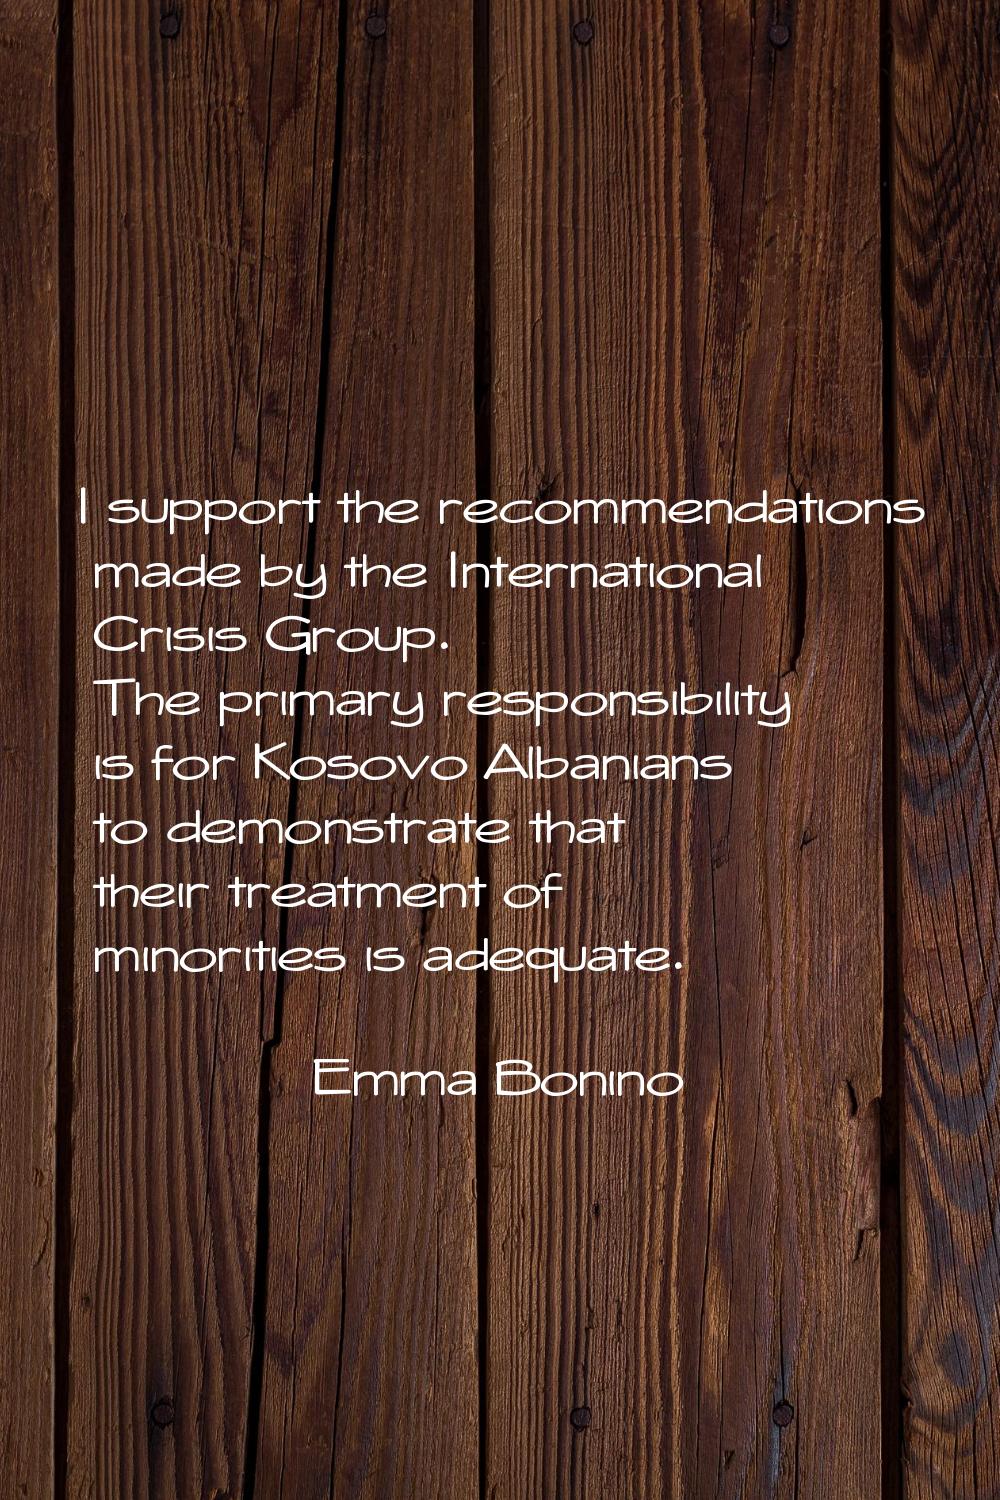 I support the recommendations made by the International Crisis Group. The primary responsibility is